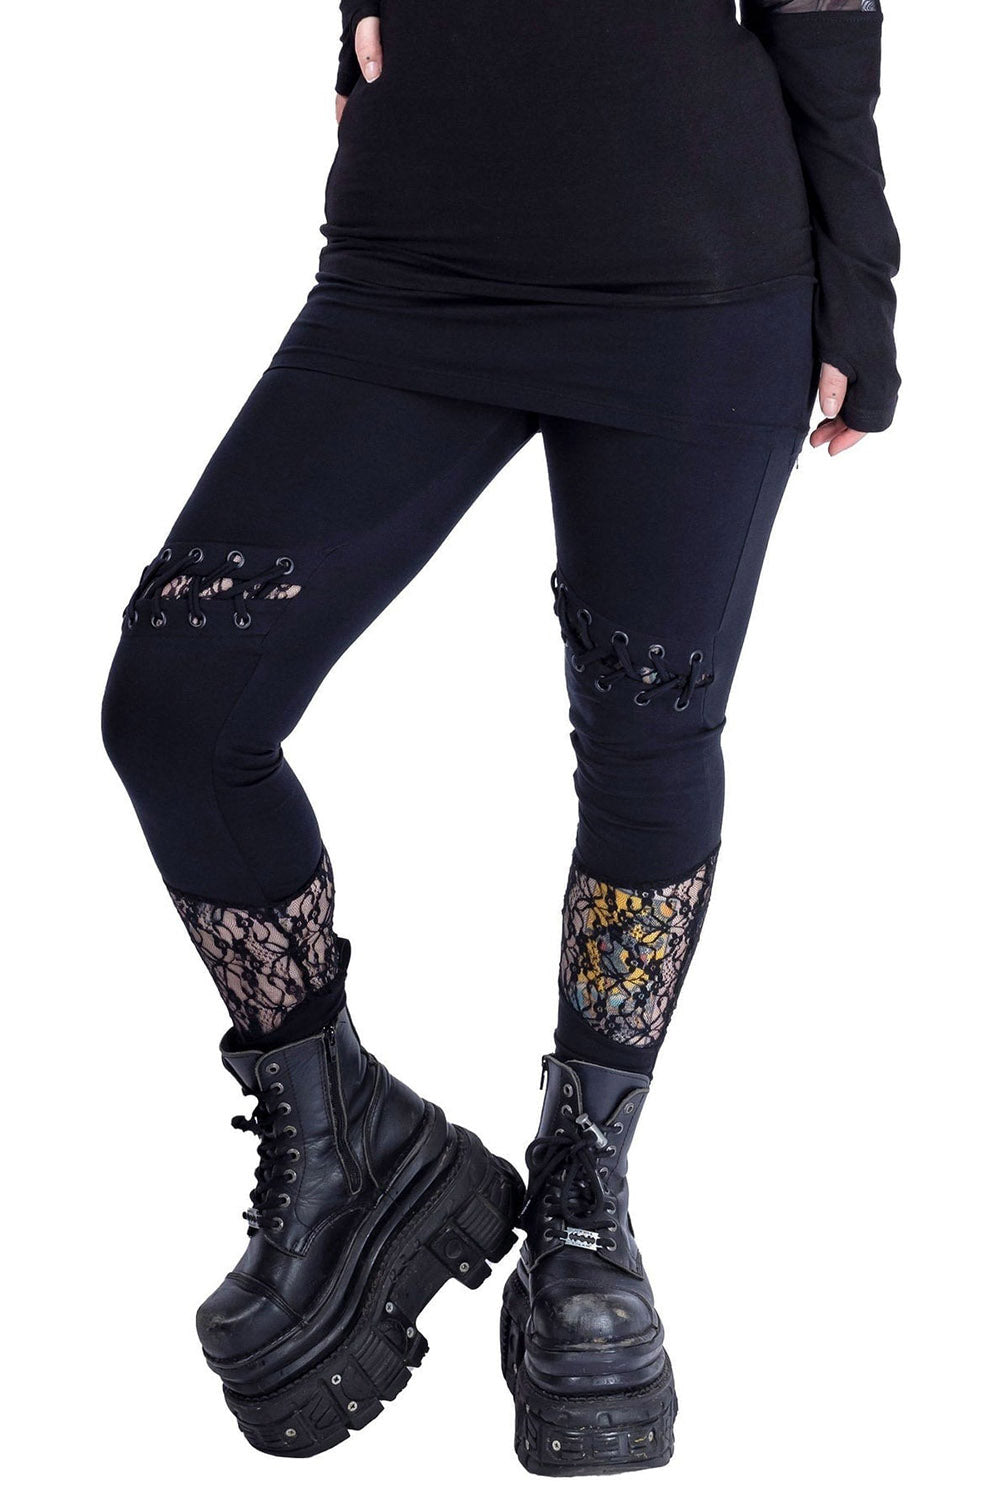 womens cut out leggings with lace underneath